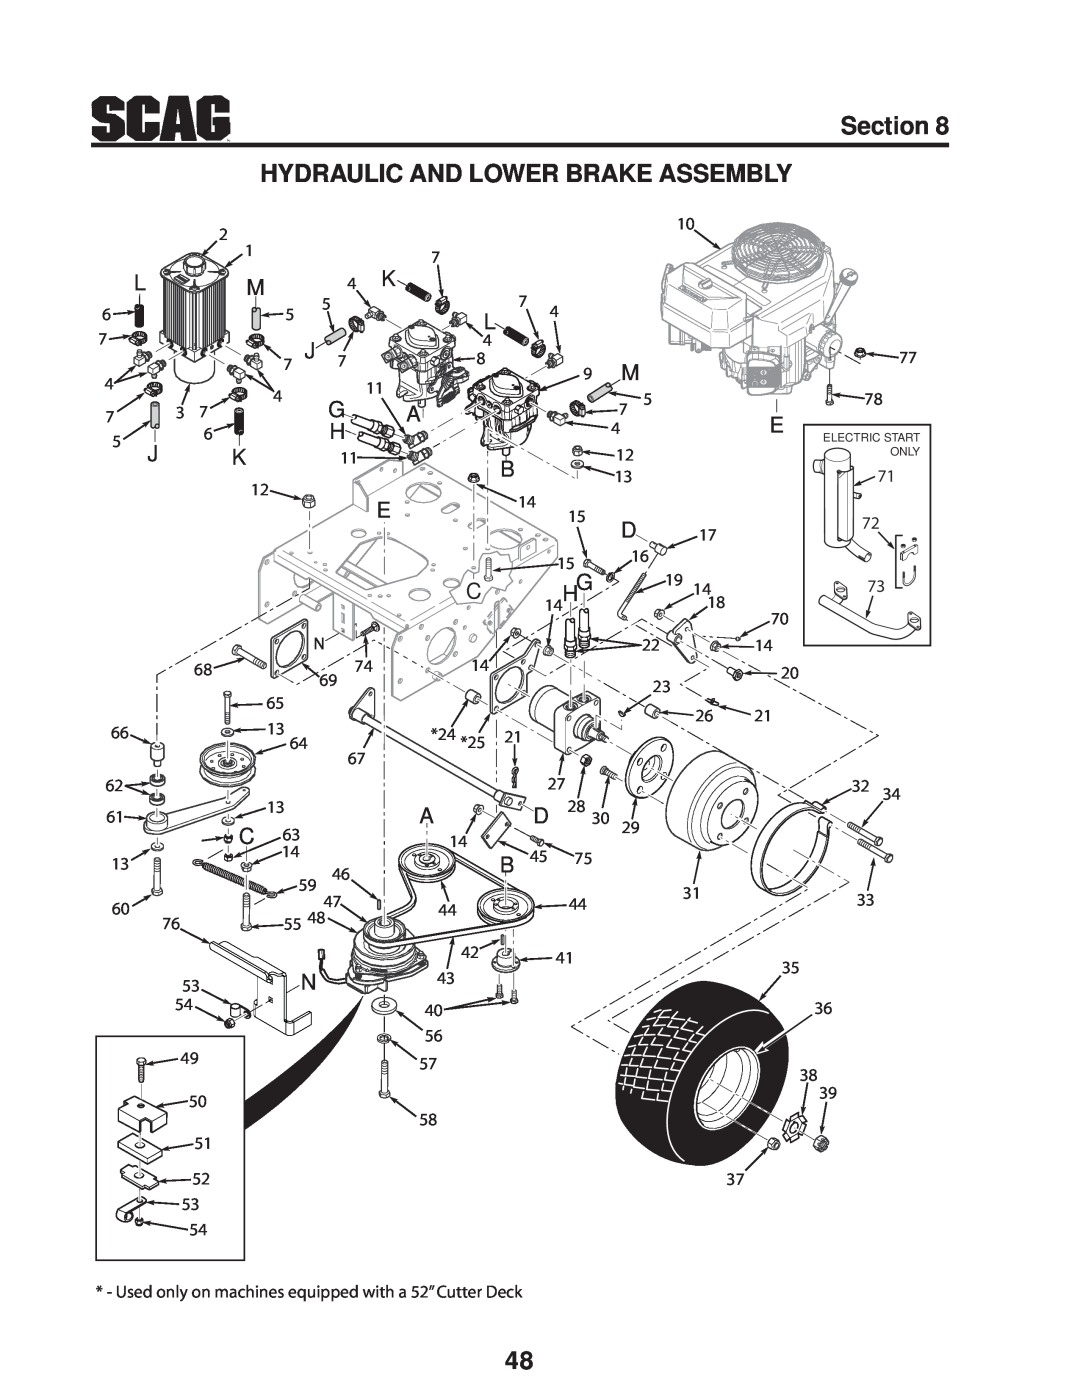 Scag Power Equipment SWZV manual Section HYDRAULIC AND LOWER BRAKE ASSEMBLY, 7 J, 14 H 